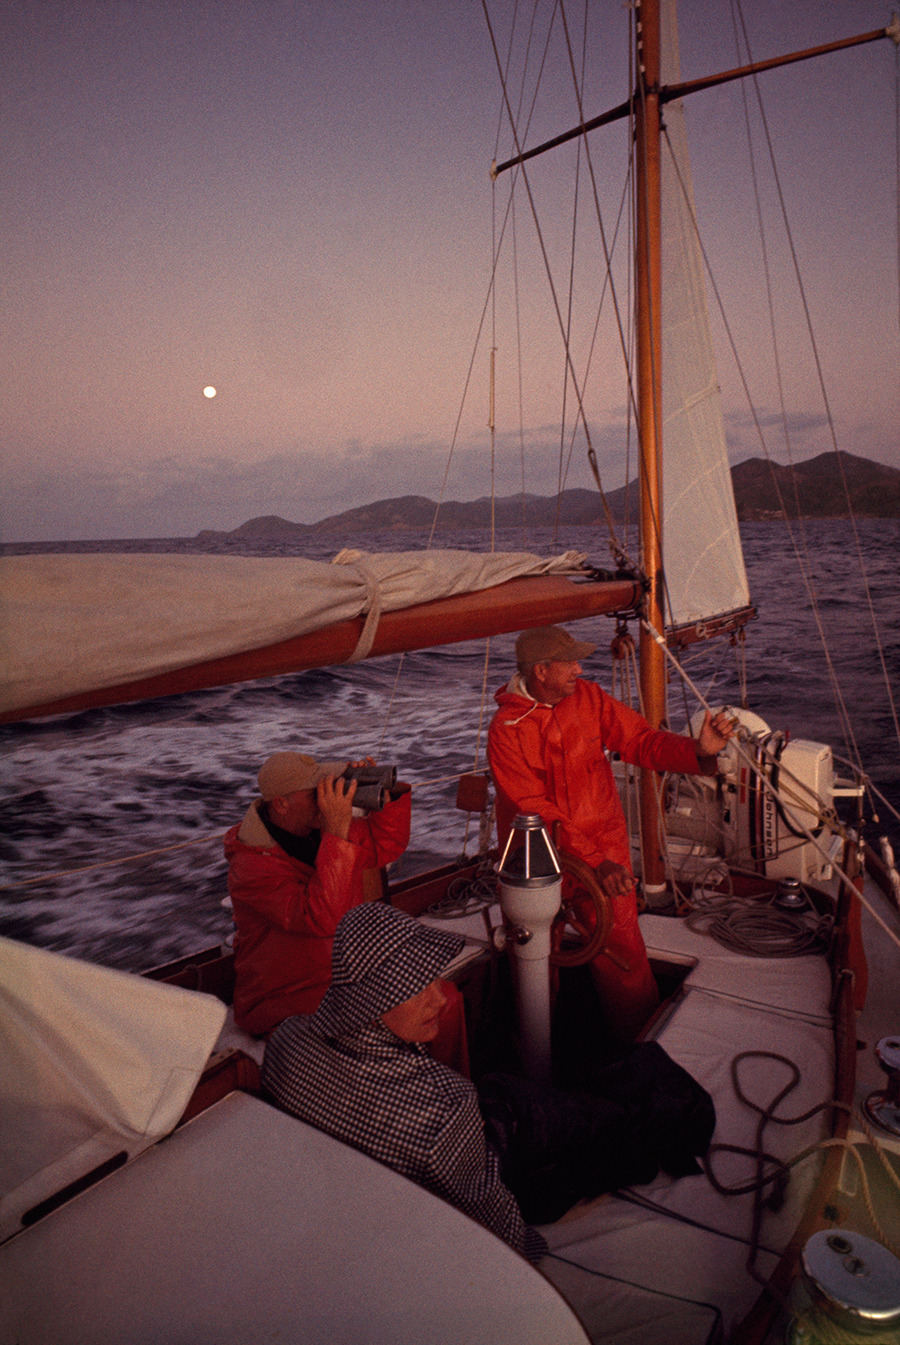 Sailors wearing raingear sit in a sailboat’s cockpit awaiting dawn in the West Indies, October 1966.Photograph by Winfield Parks, National Geographic